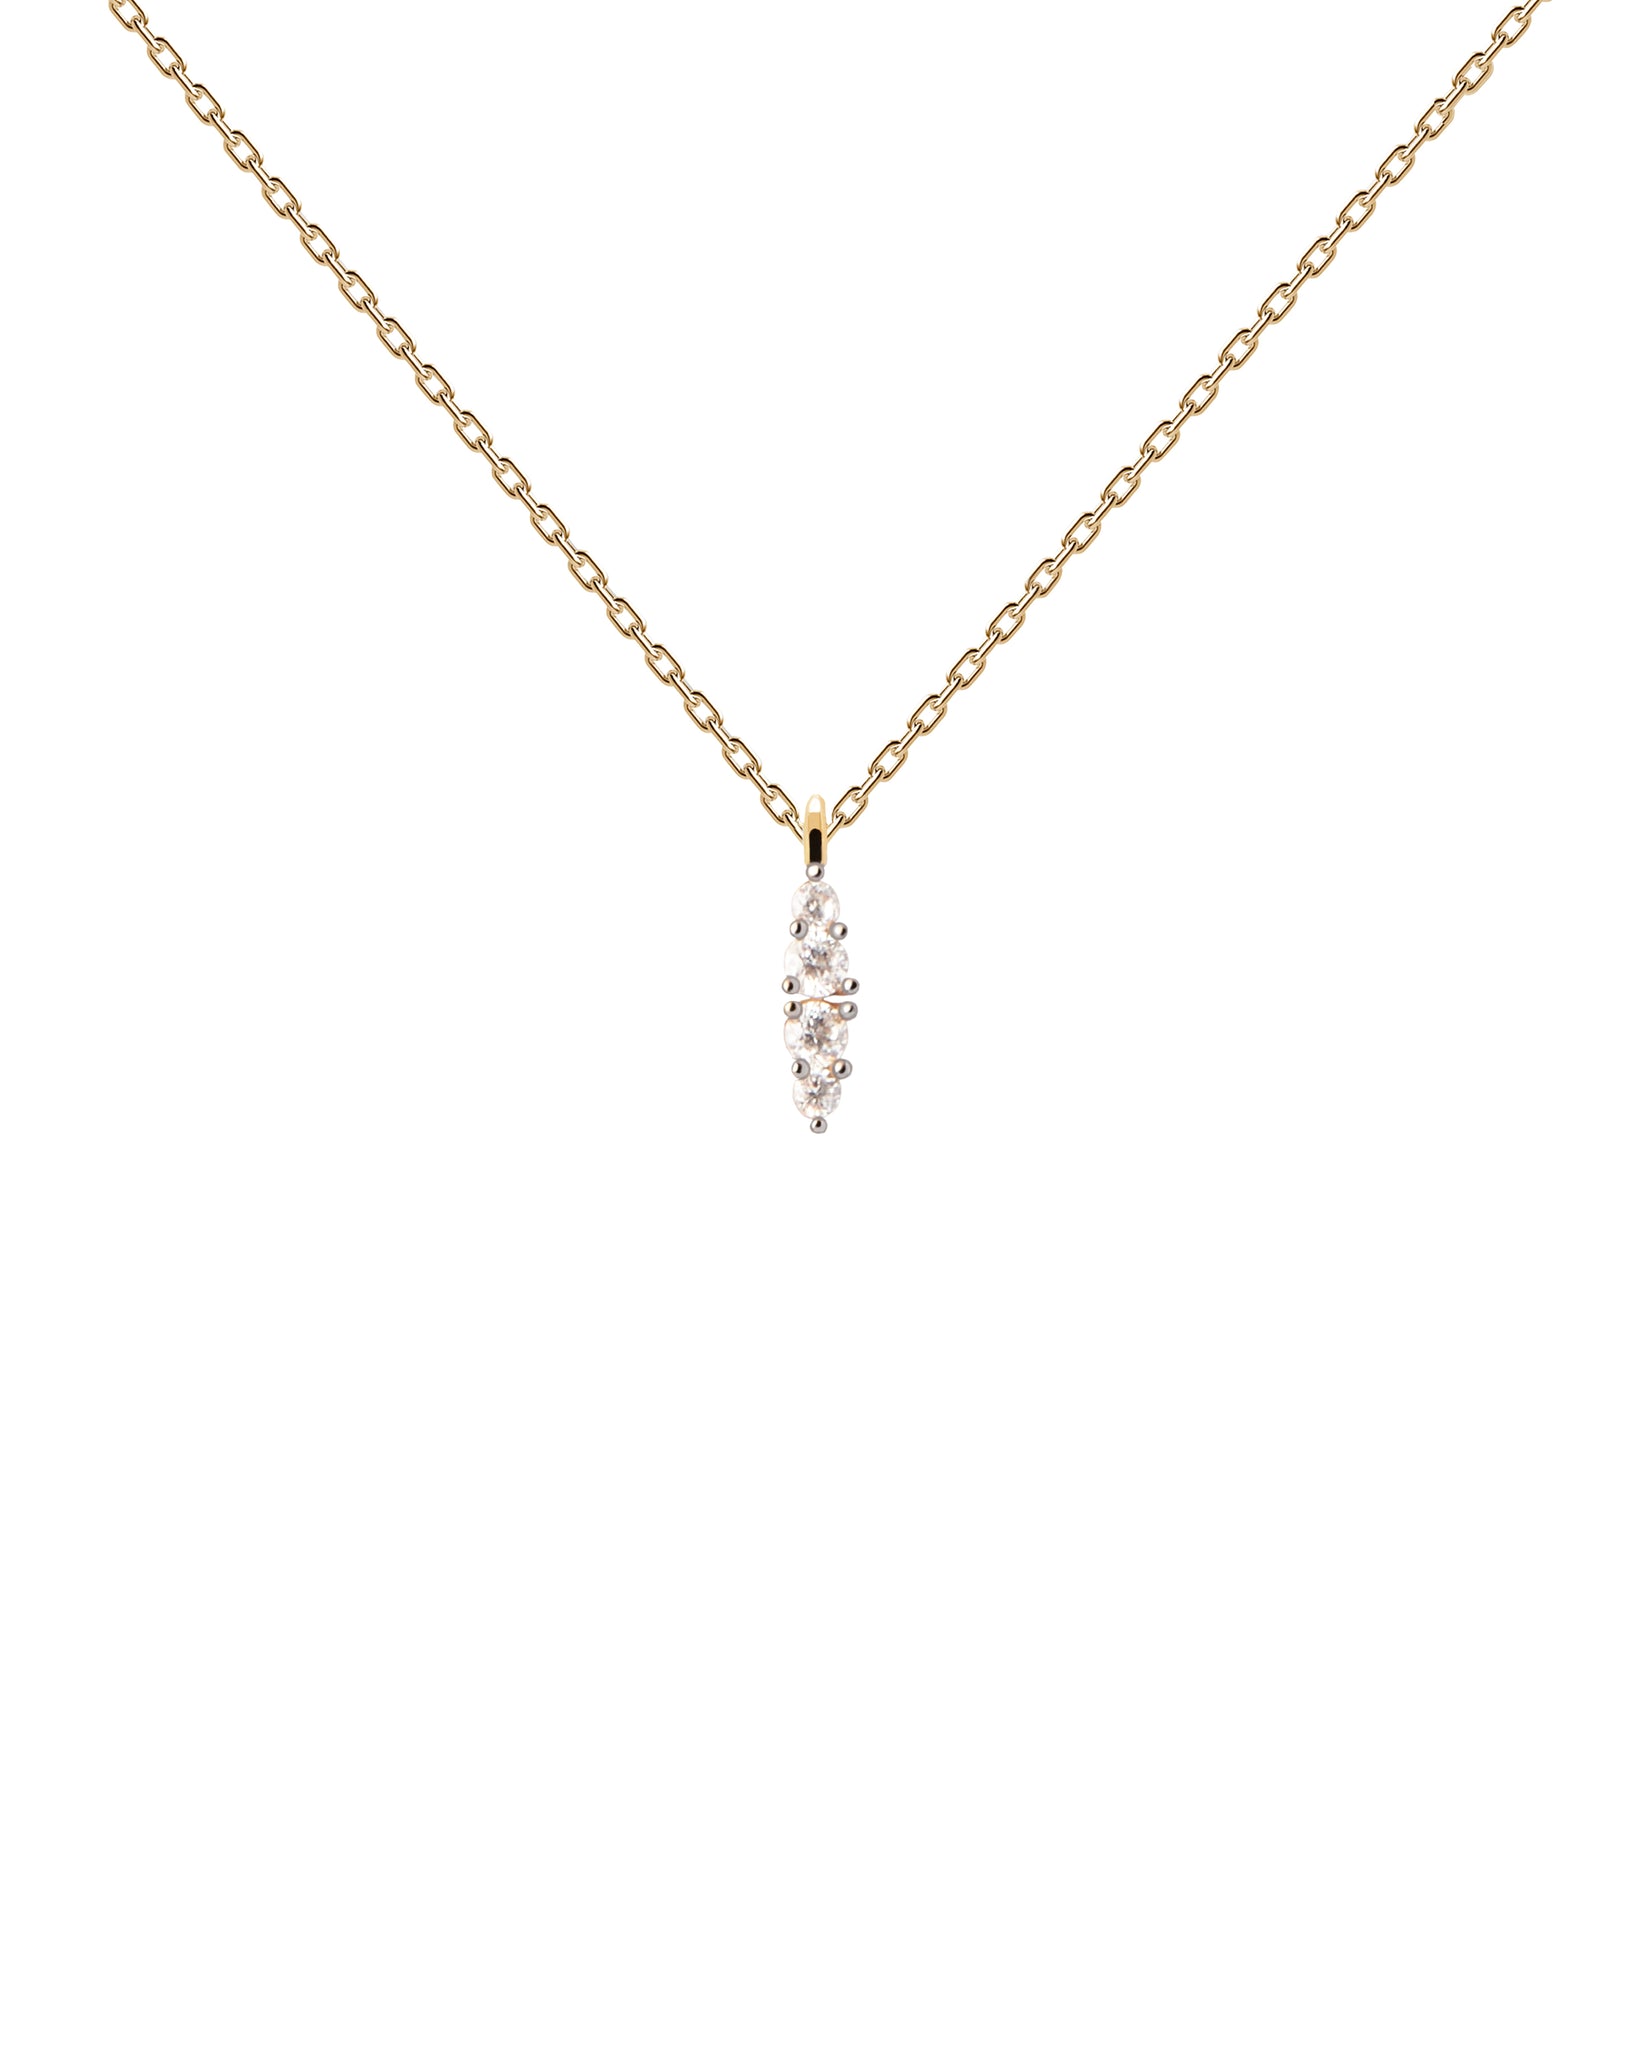 PDPAOLA Gala Necklace - 925 Sterling Silver / 18K Gold Plating